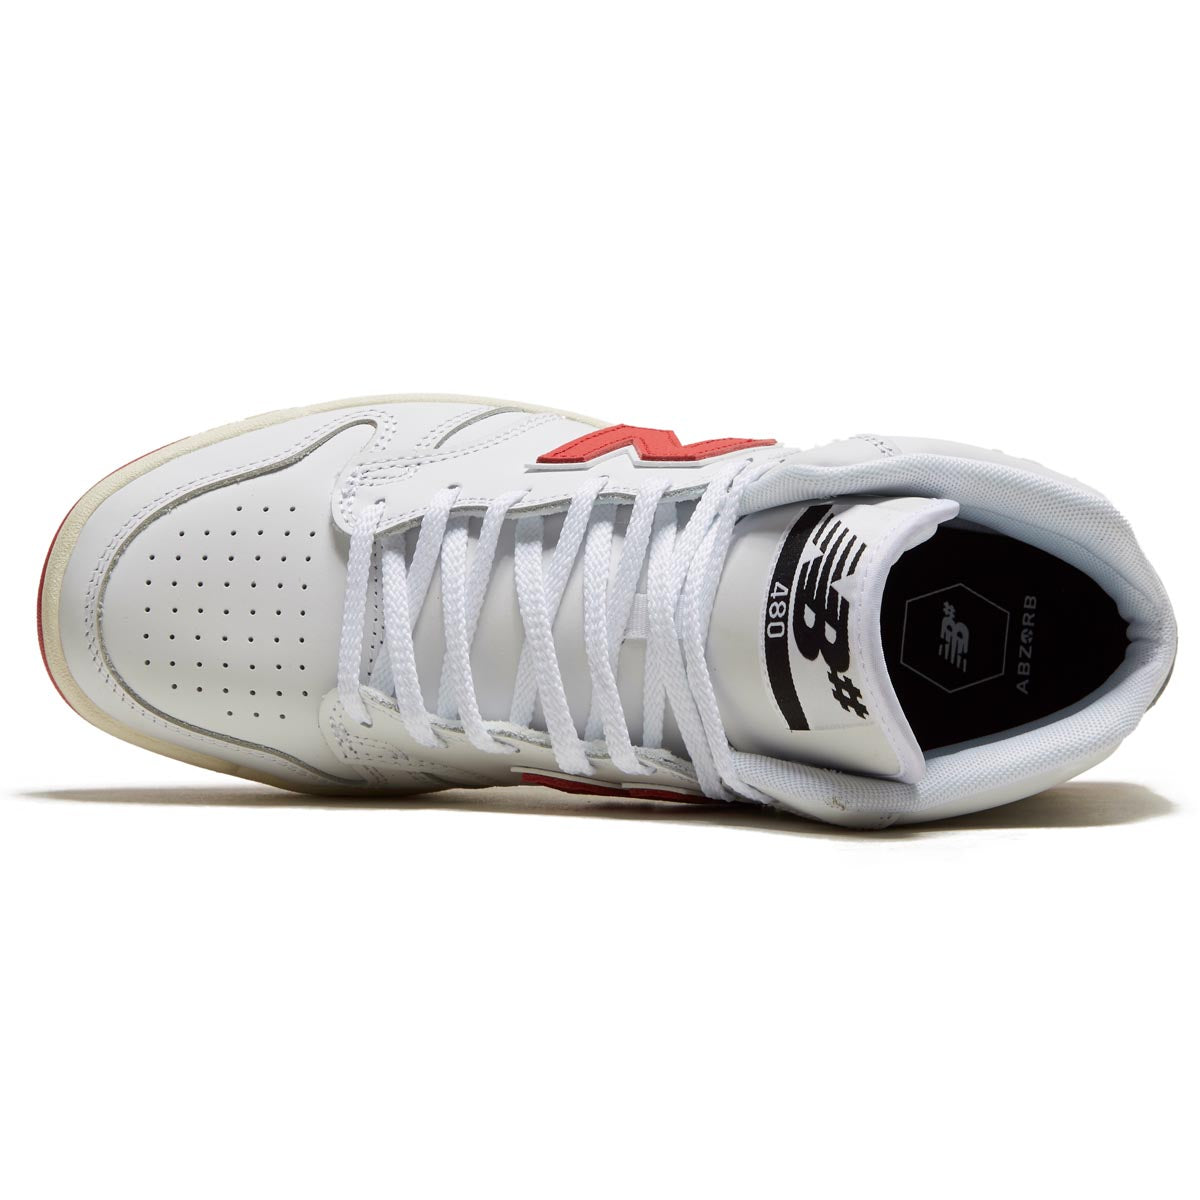 New Balance 480 High Shoes - White/Red image 3